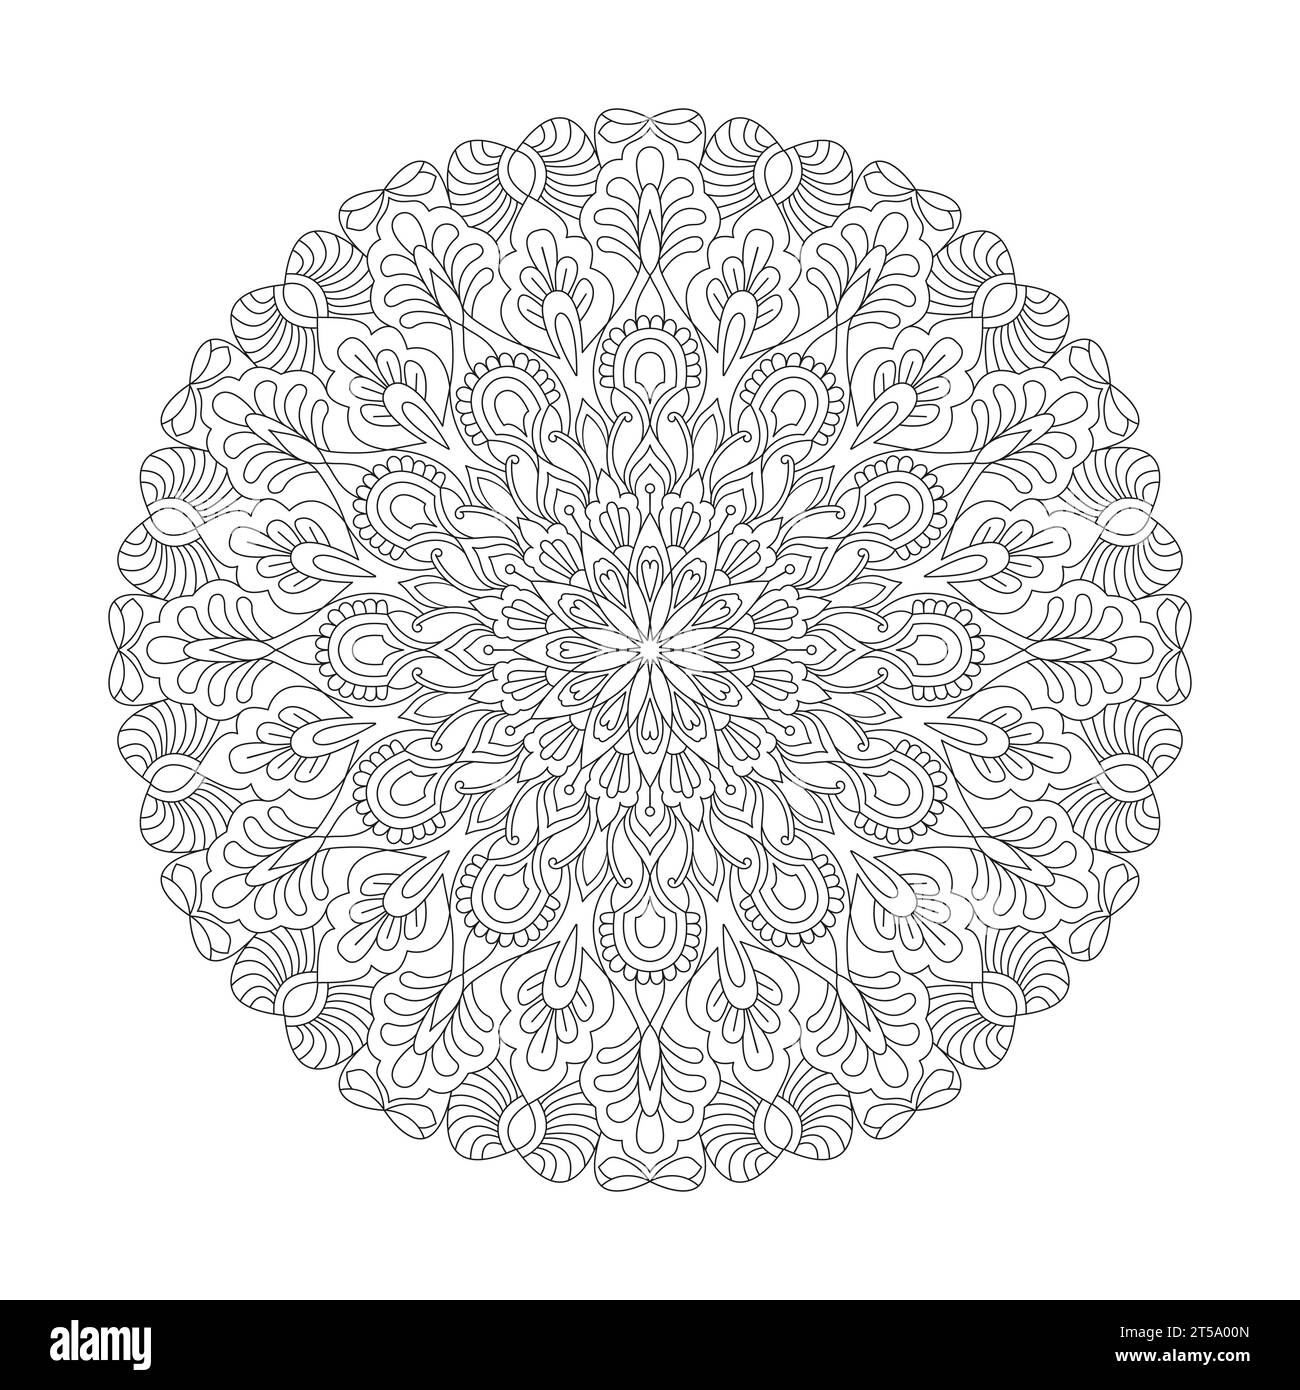 120 Abstract Coloring Designs: Adult Coloring Book / Stress